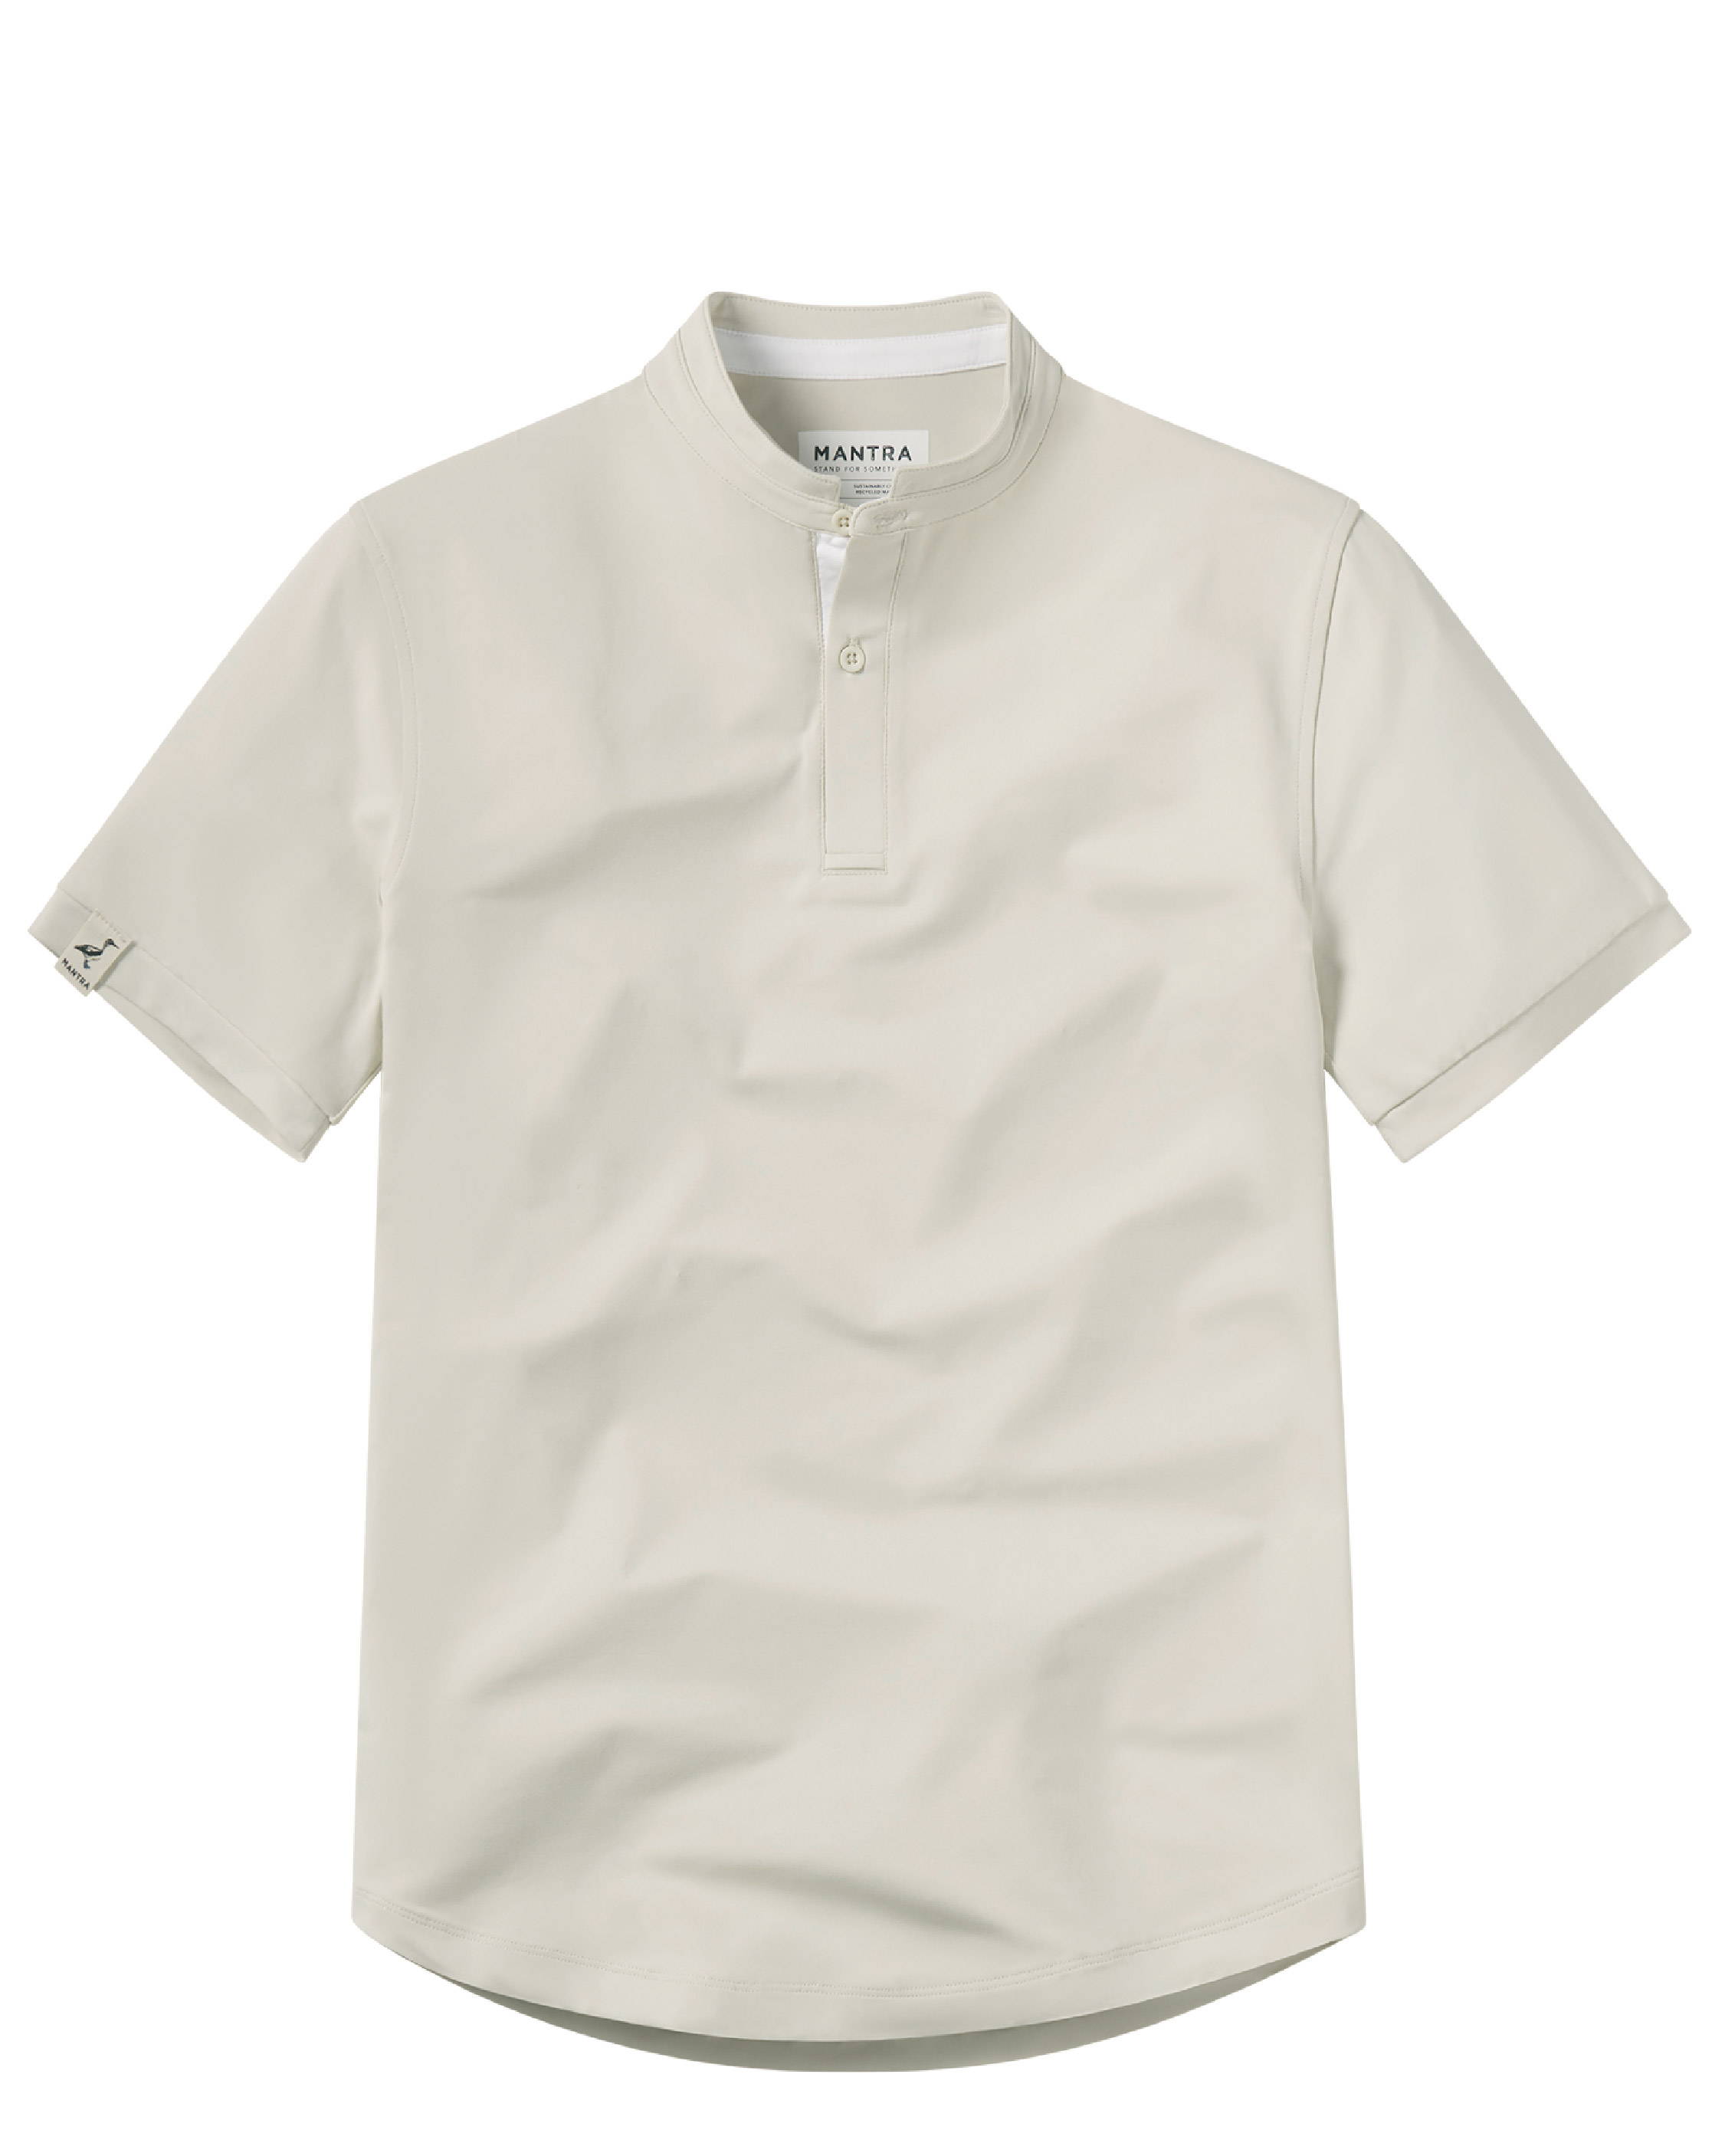 MANTRA BIRCH Polo - sustainable mens performance polo made from recycled materials